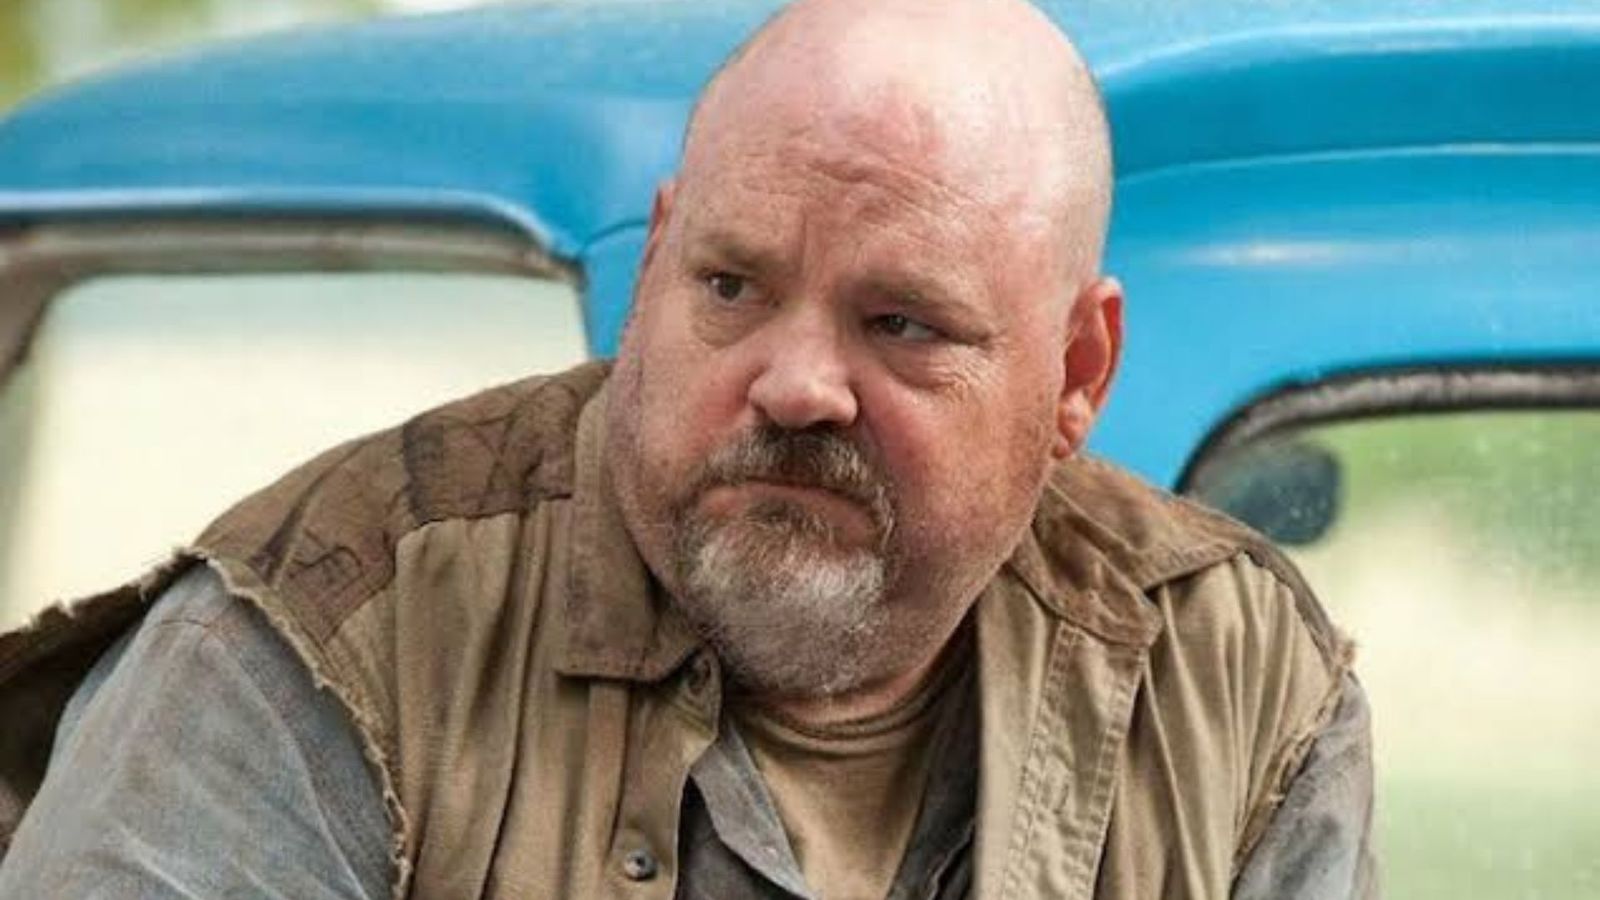 Image showing Pruitt Taylor Vince standing on front of a truck